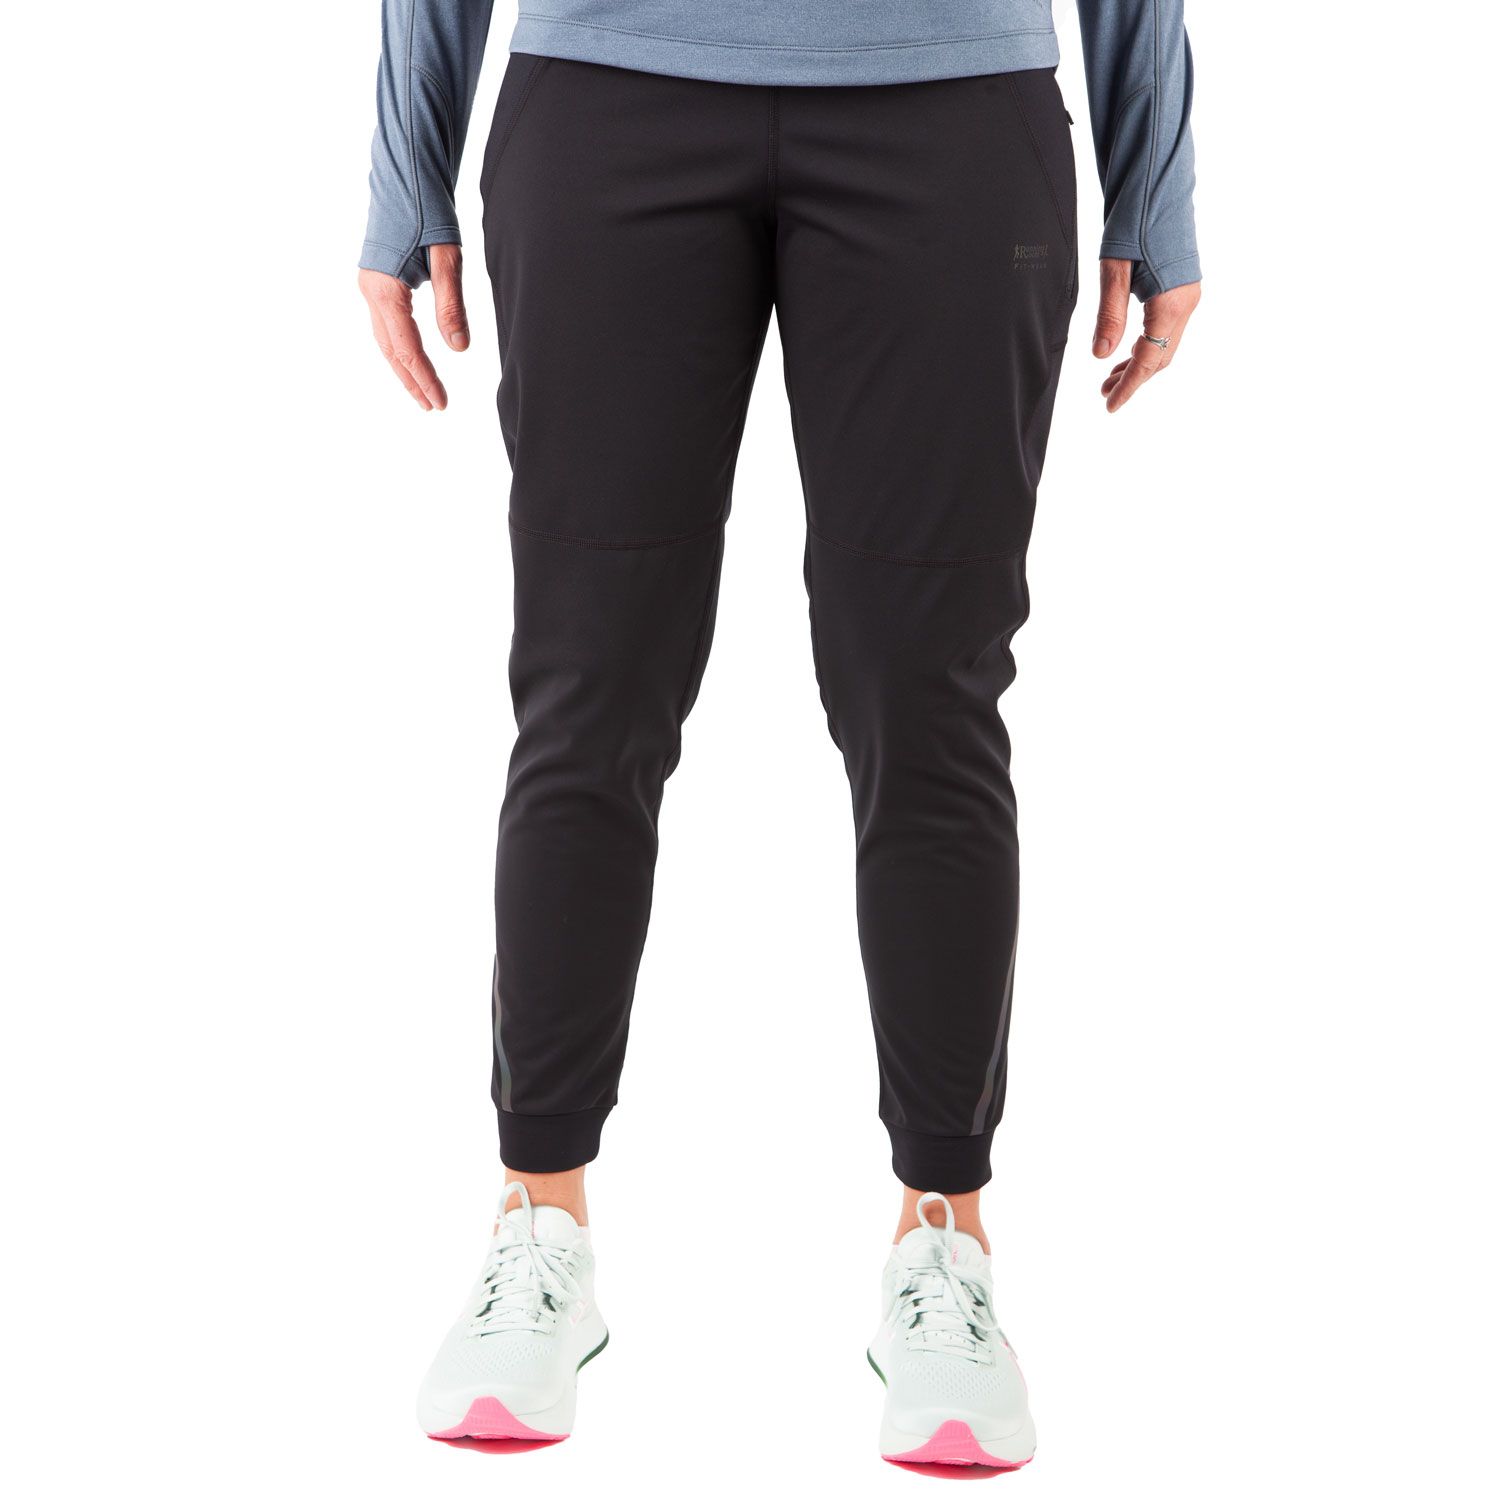 Running Room Women's Extreme Weather Wind-Proof Slim Pant